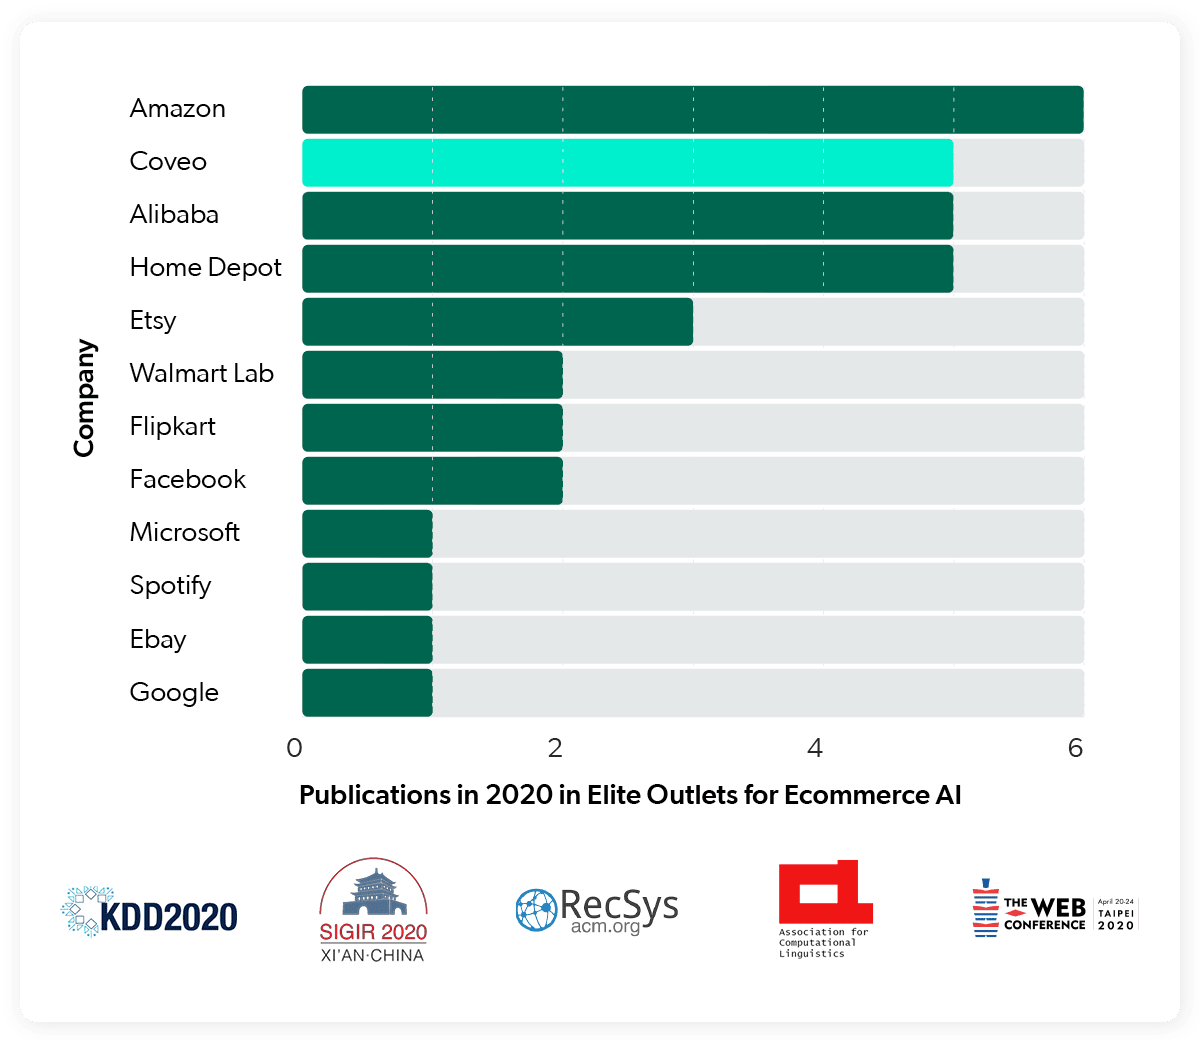 graph of elite outlets for Ecommerce AI with Coveo at #2